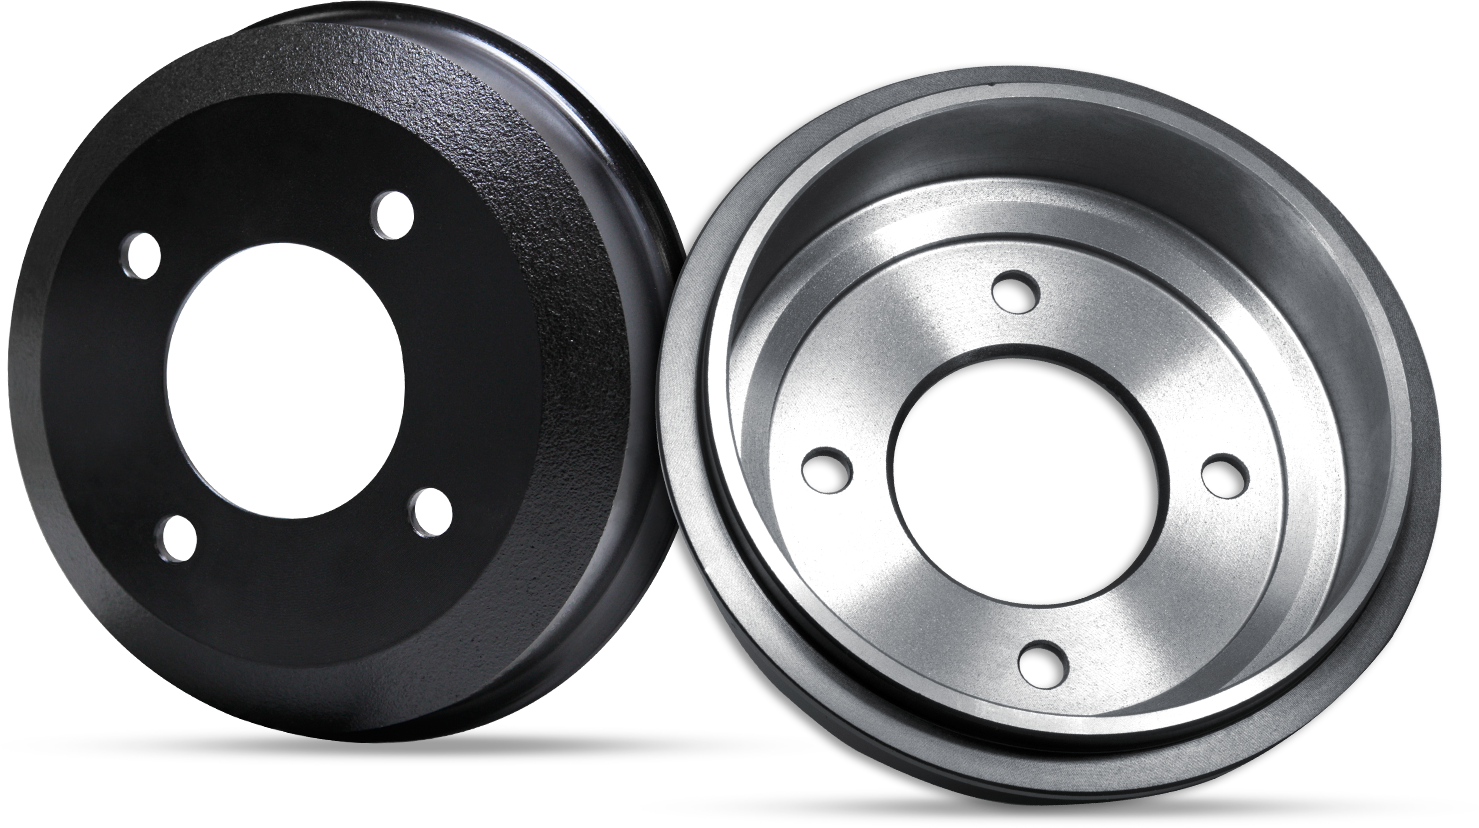 A pair of brake drums for Clark forklifts